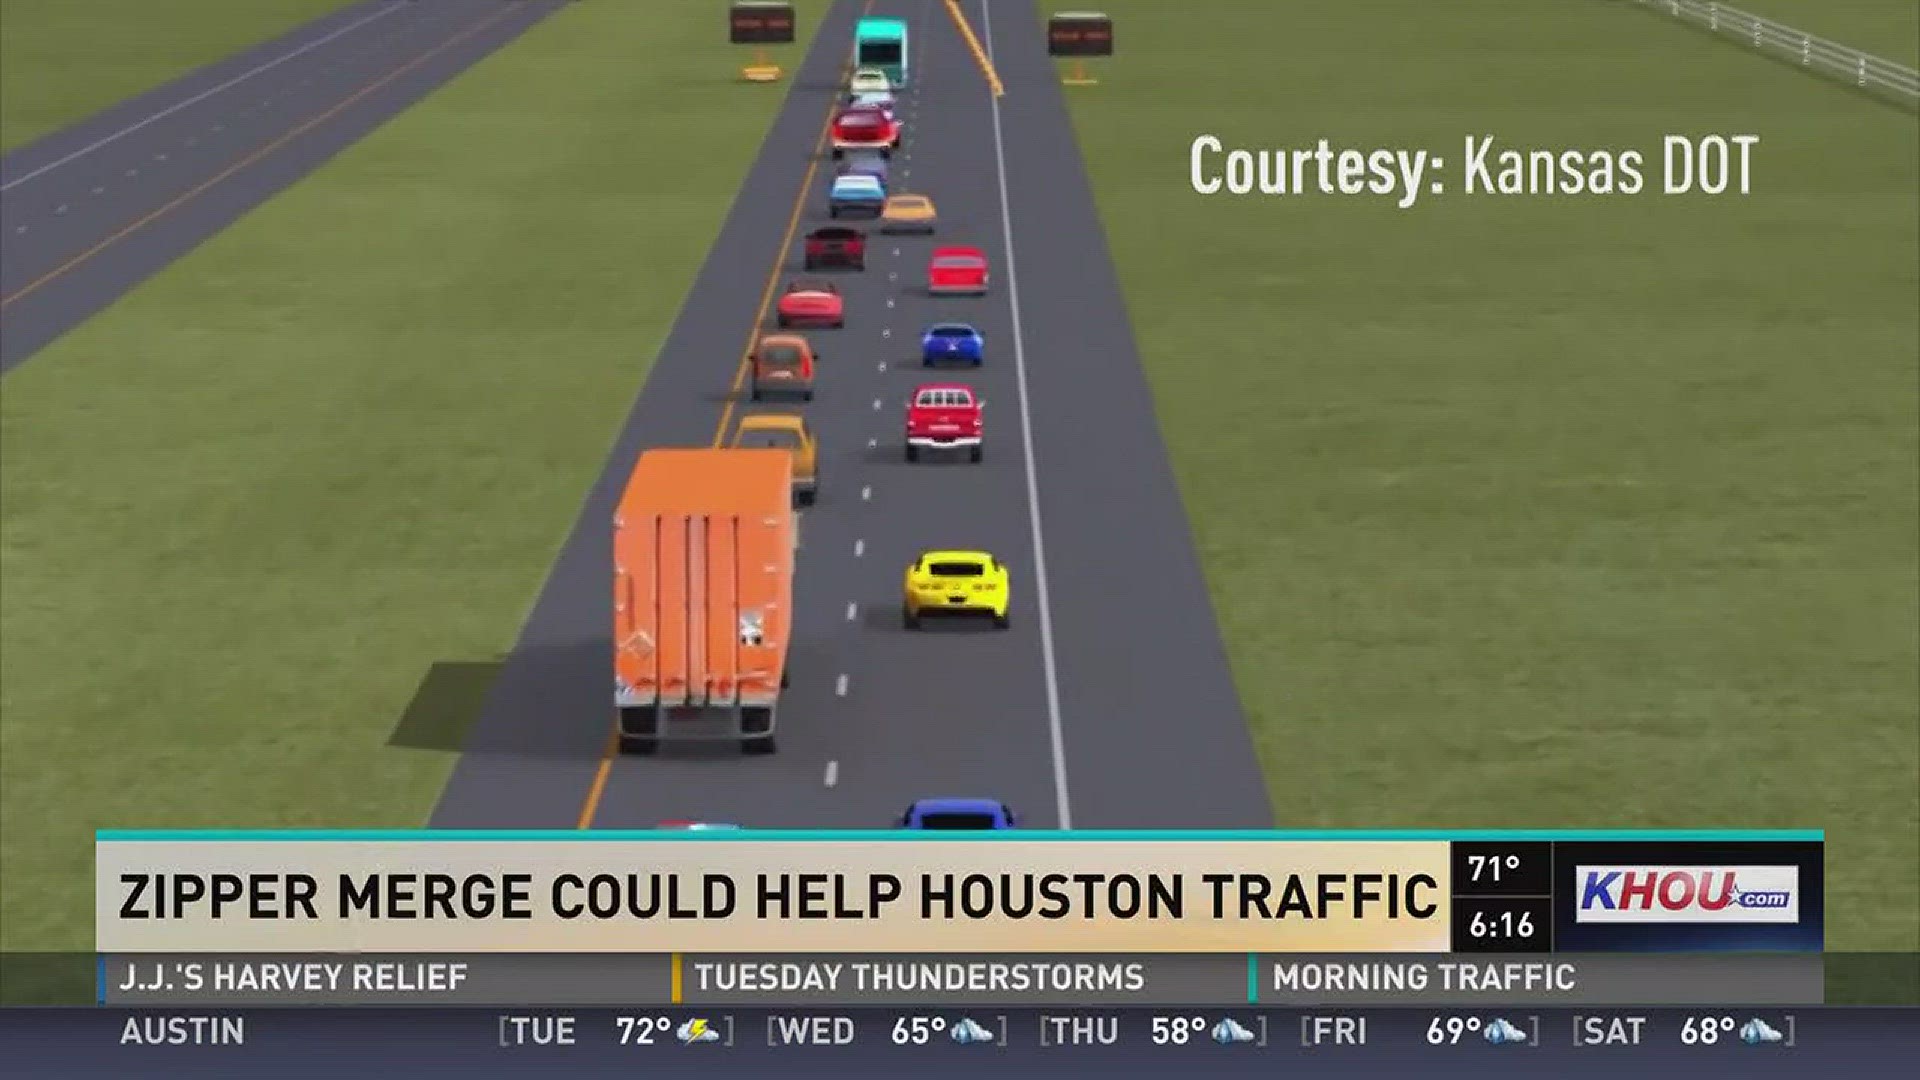 Could the zipper merge work in Texas?